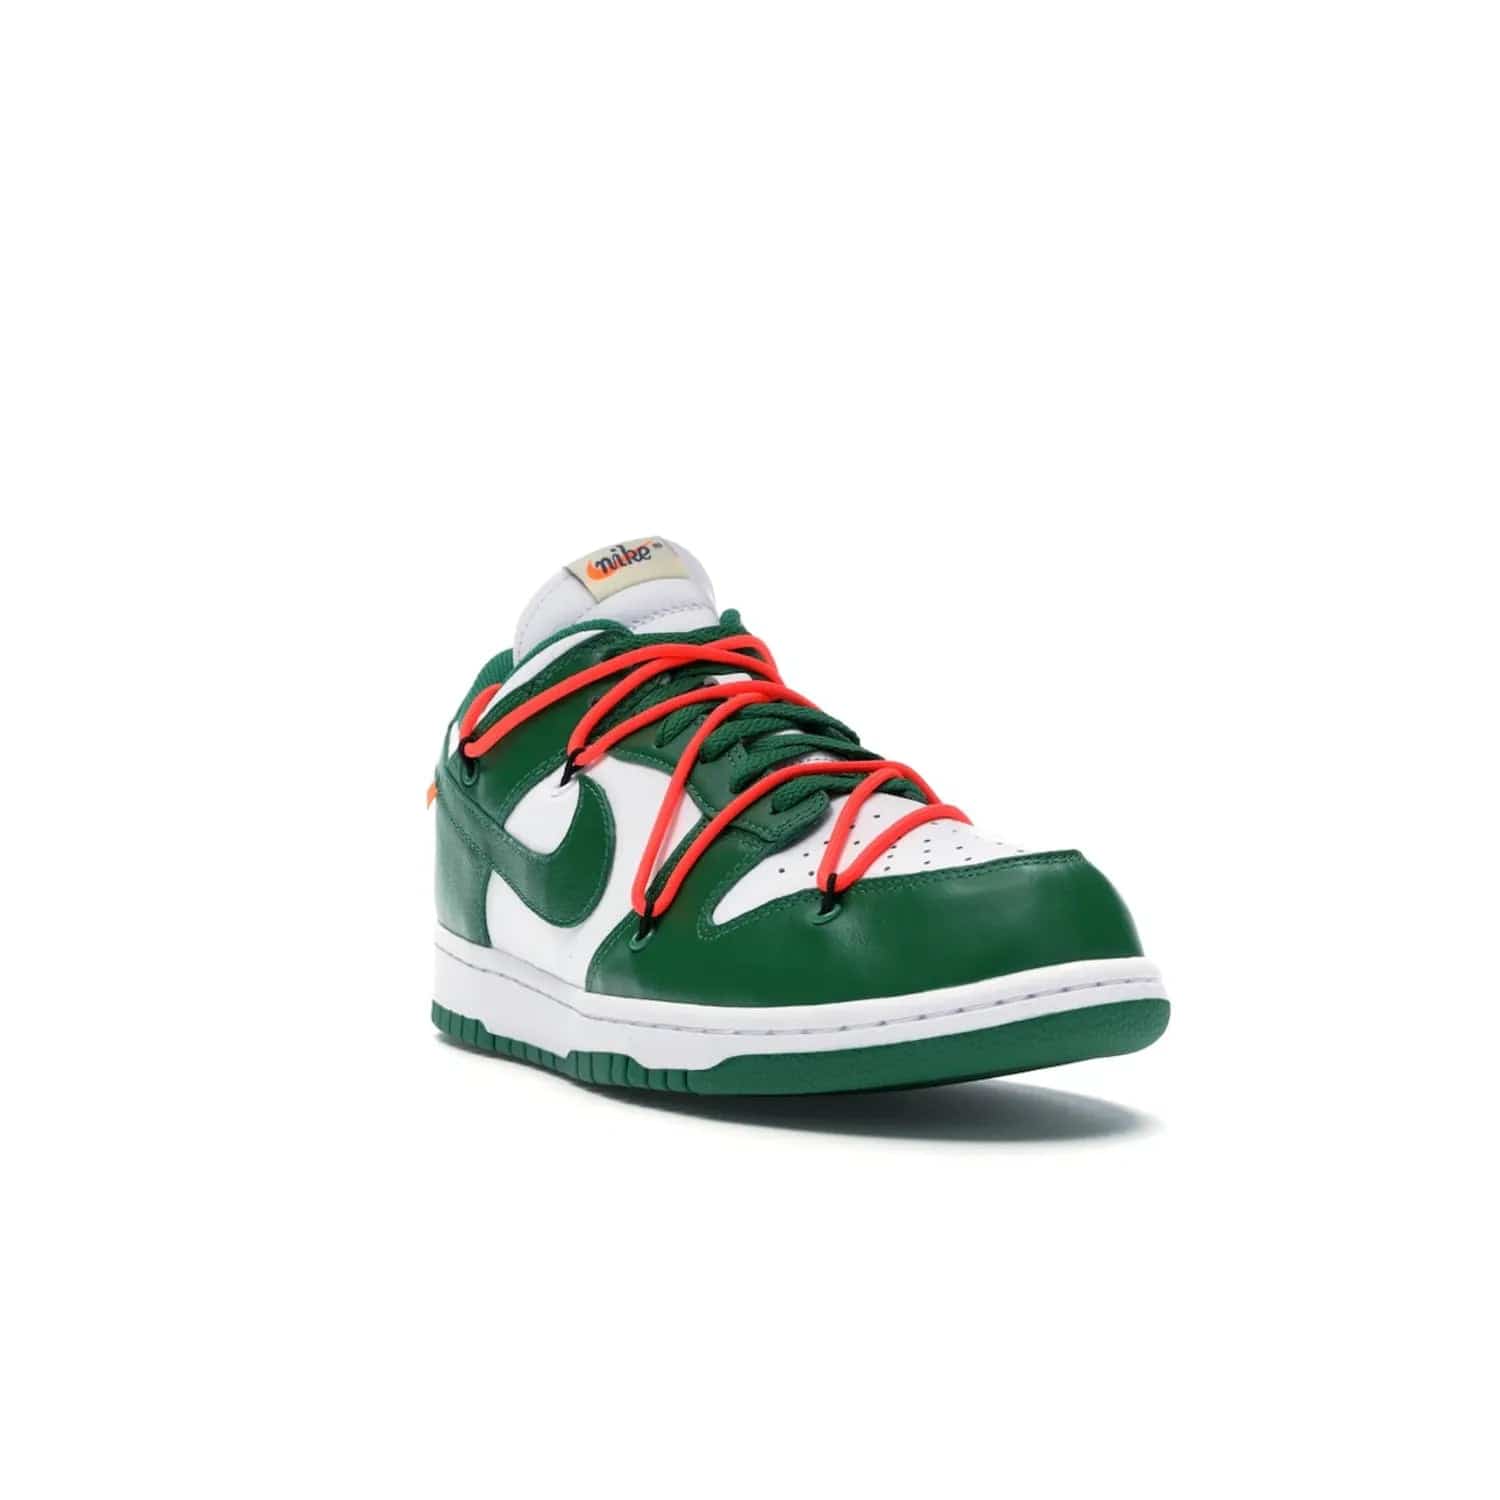 Nike Dunk Low Off-White Pine Green - Image 7 - Only at www.BallersClubKickz.com - The Nike Dunk Low Off-White Pine Green combines classic 1980s style with modern-day design. Featuring white leather uppers and pine green overlays, these classic kicks feature secondary lacing system, zip-ties and signature Off-White text. Releasing in December 2019, these shoes are a timeless classic for any wardrobe.